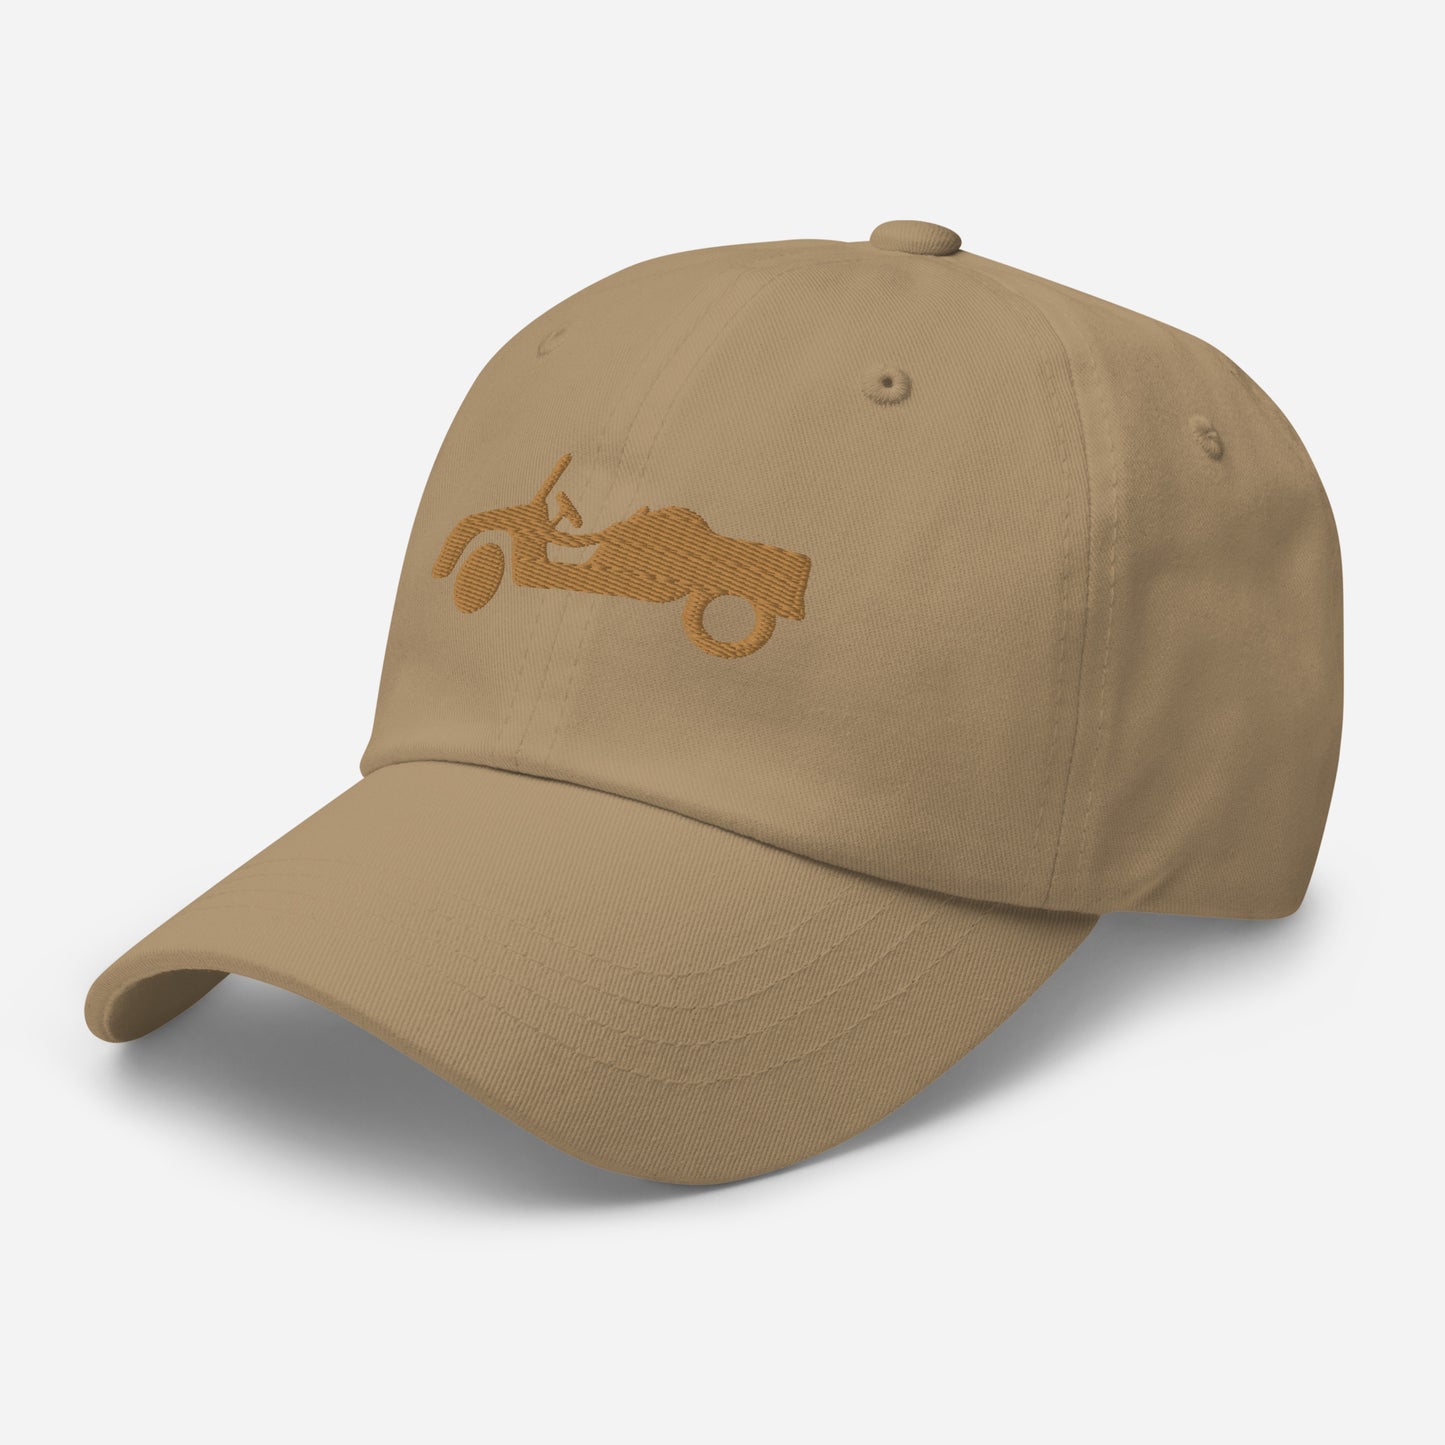 3D Puff front and back beige embroidered cap Citroën Méhari HOGGAR - Black, Beige and White